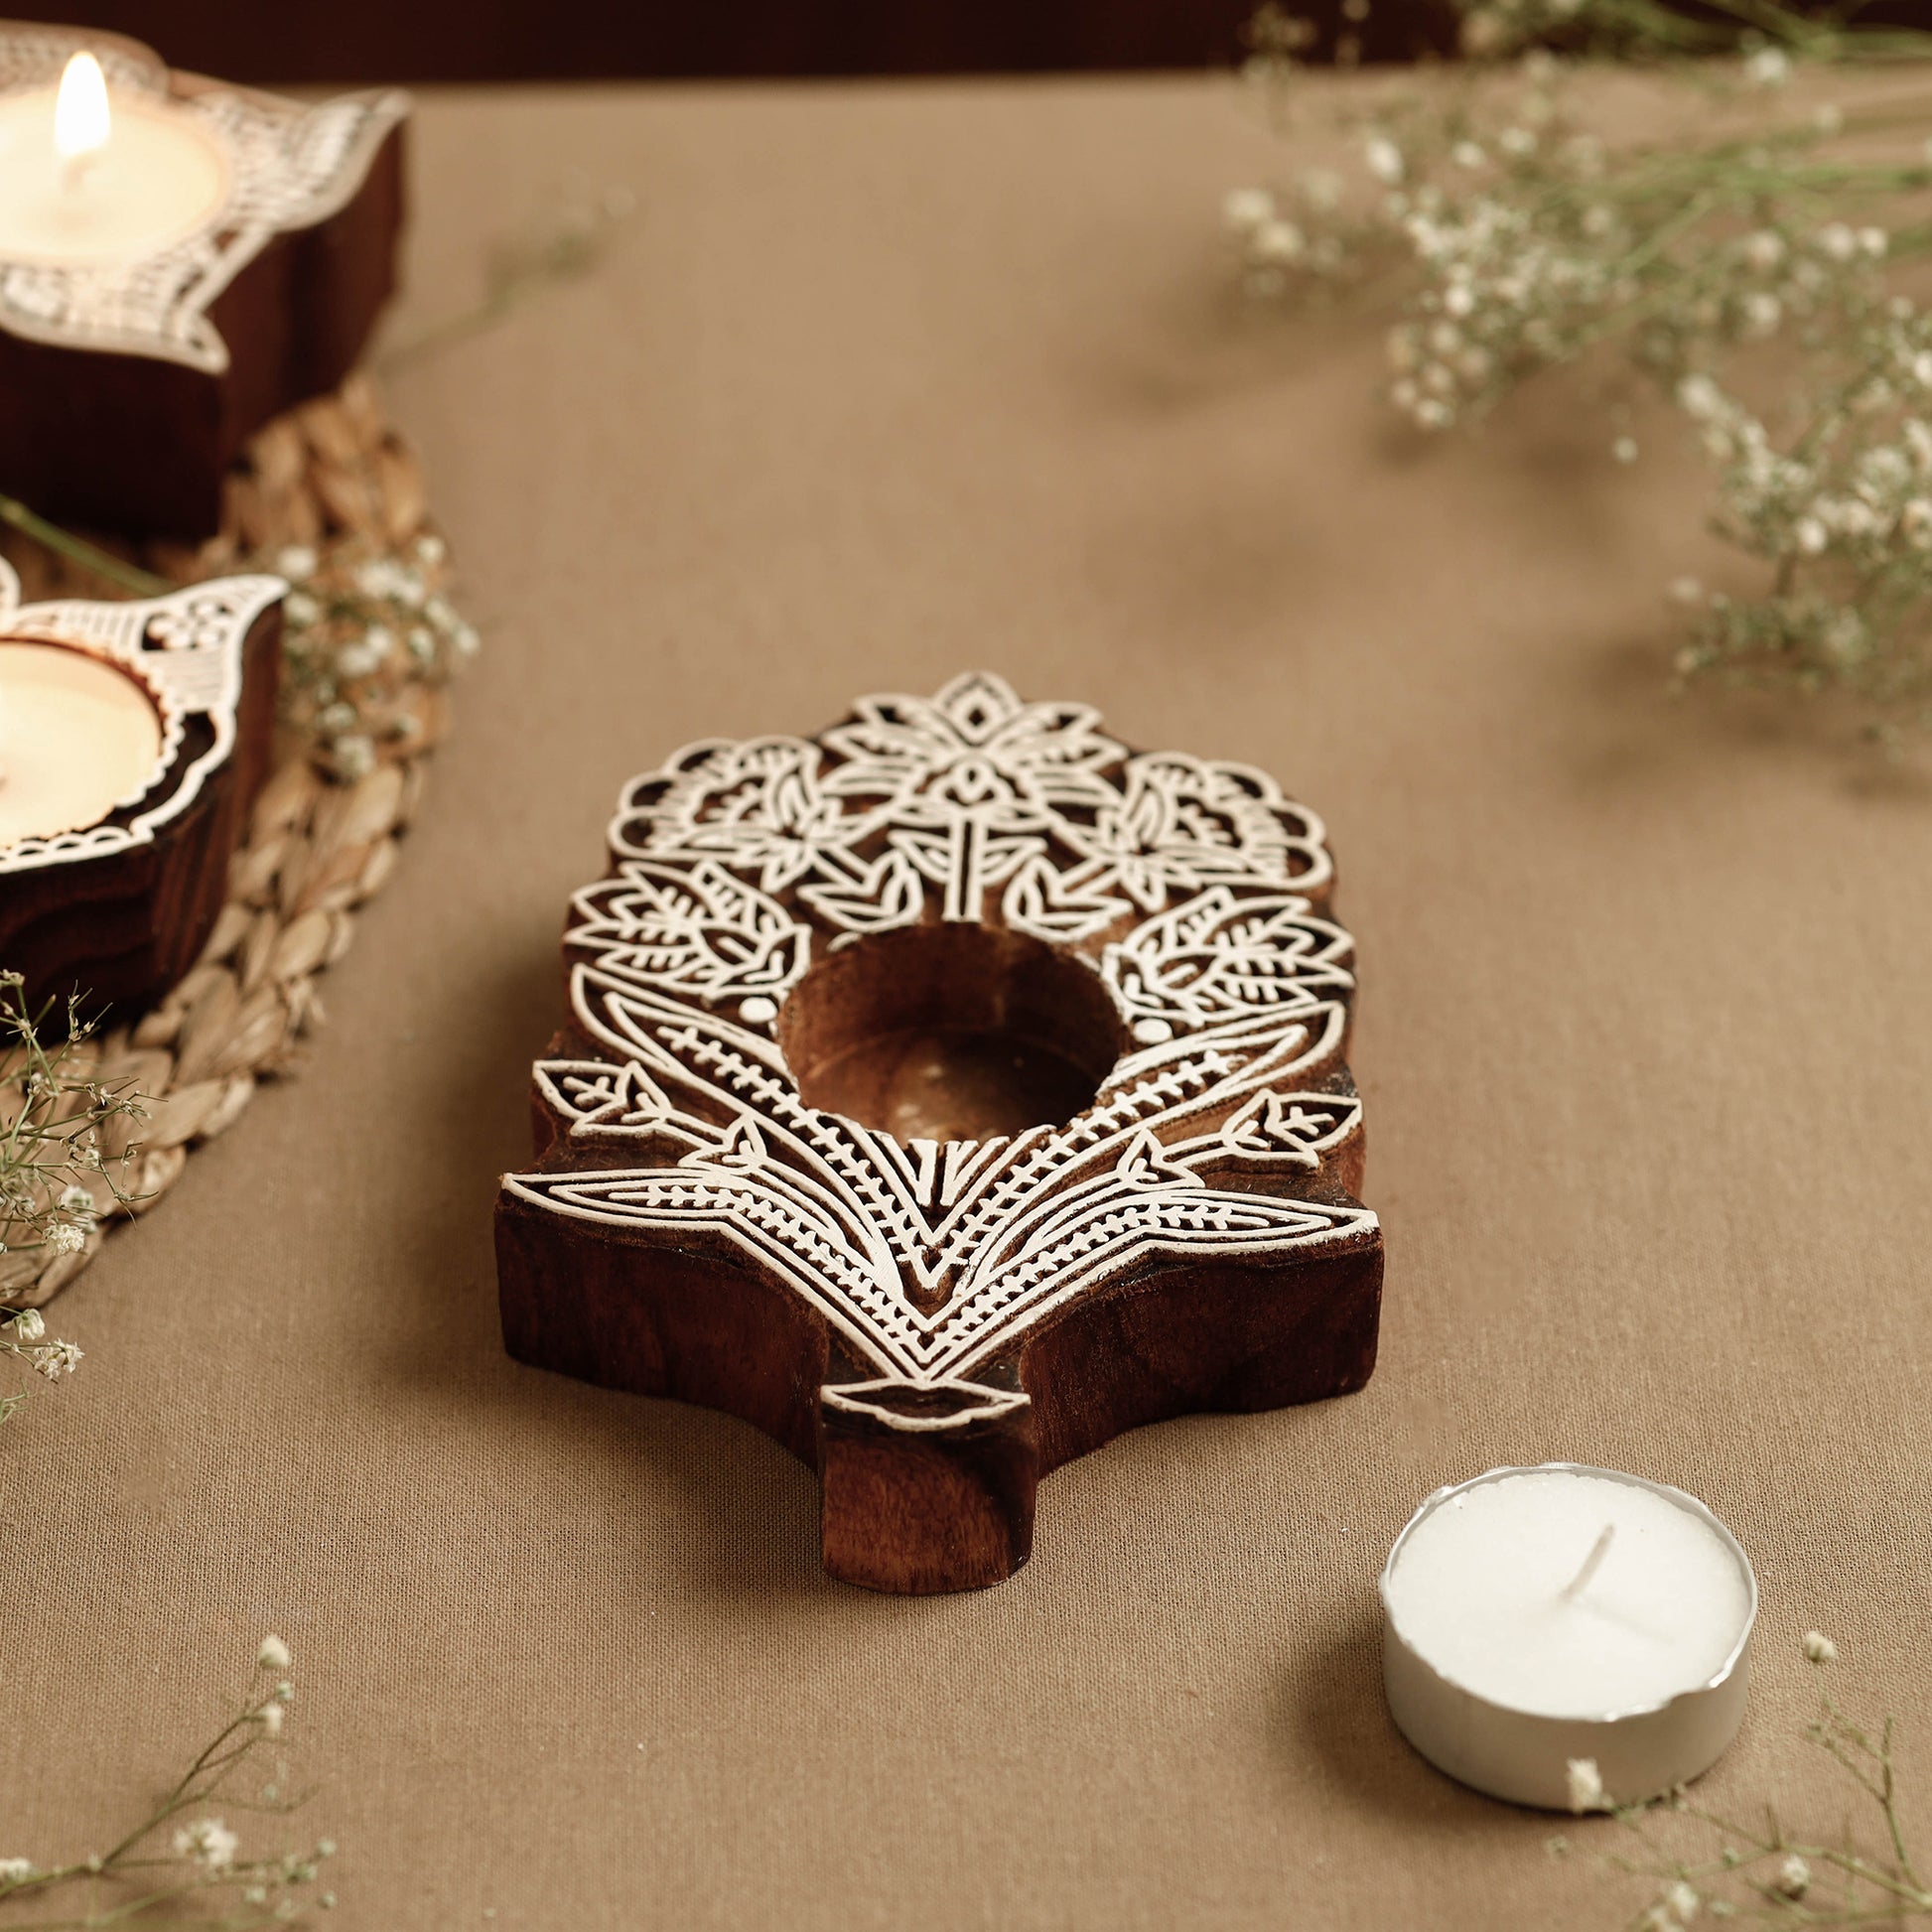  wooden candle holder
